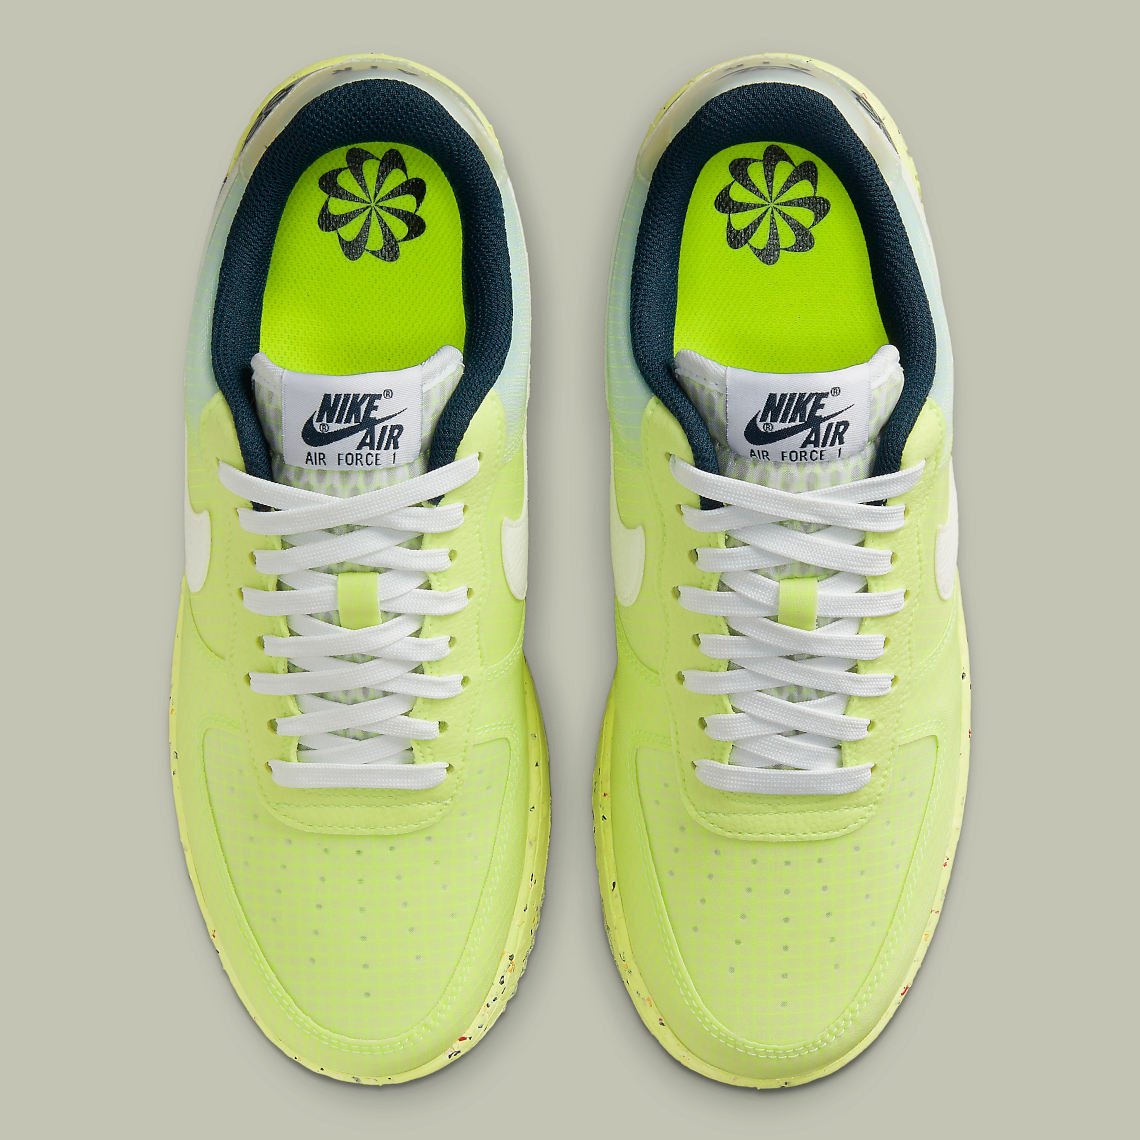 nike hyperdunk low grey yellow shoes clearance Crater Dh2521 700 1